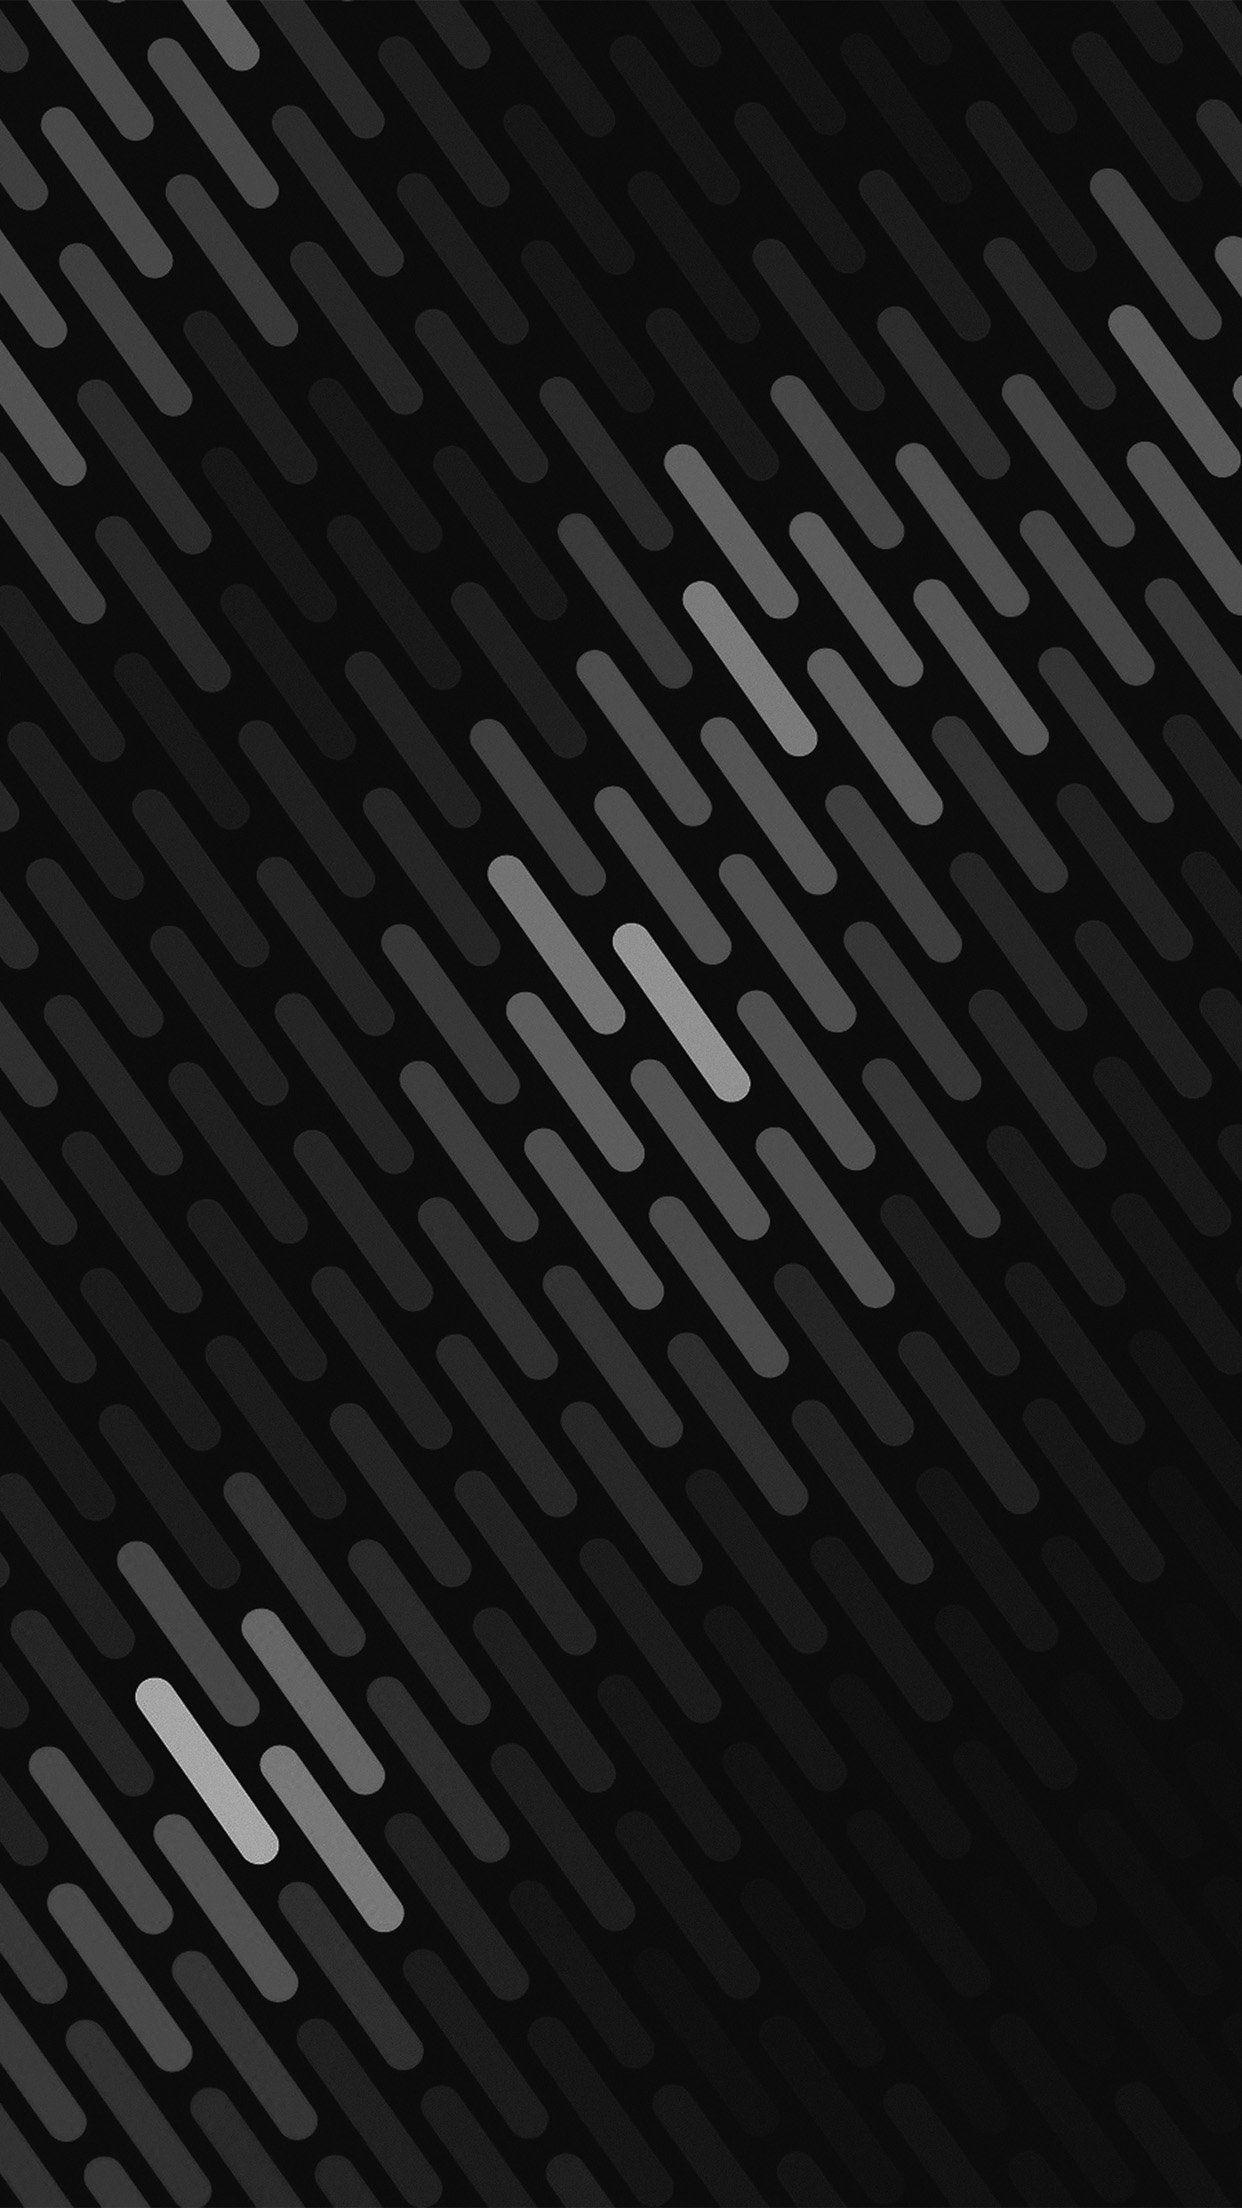 Cool Abstract Dark Bw Dots Lines Pattern Iphone6 Plus Wallpaper